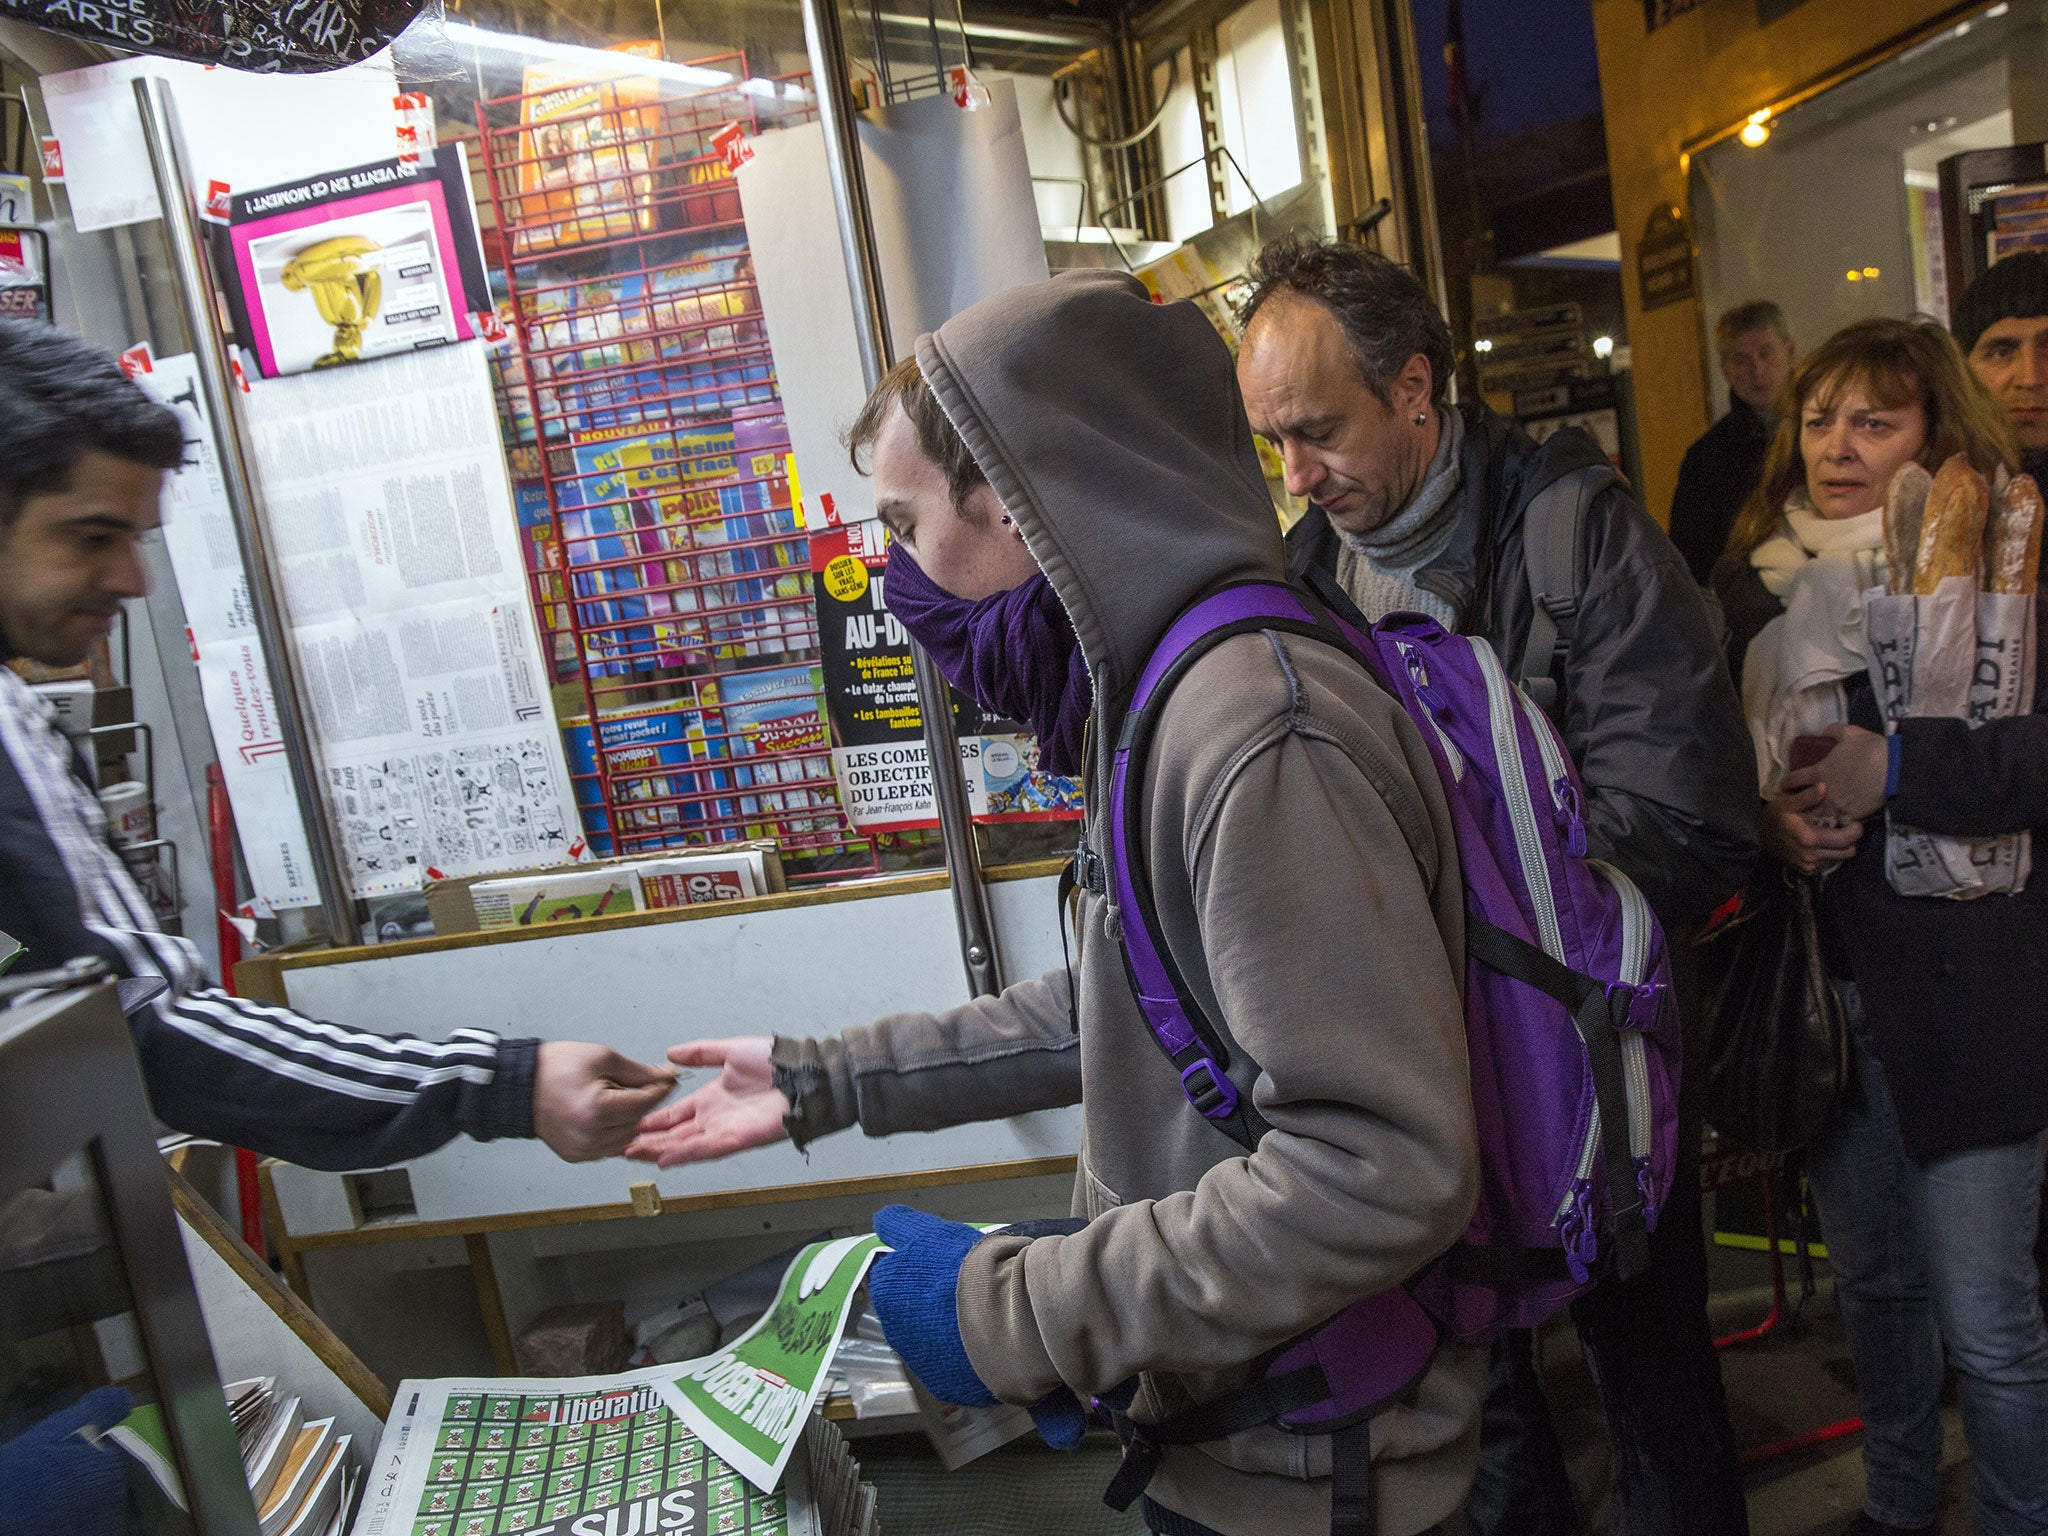 Parisians queue to buy the latest copy of Charlie Hebdo magazine, the first since gunmen killed eight of its staff